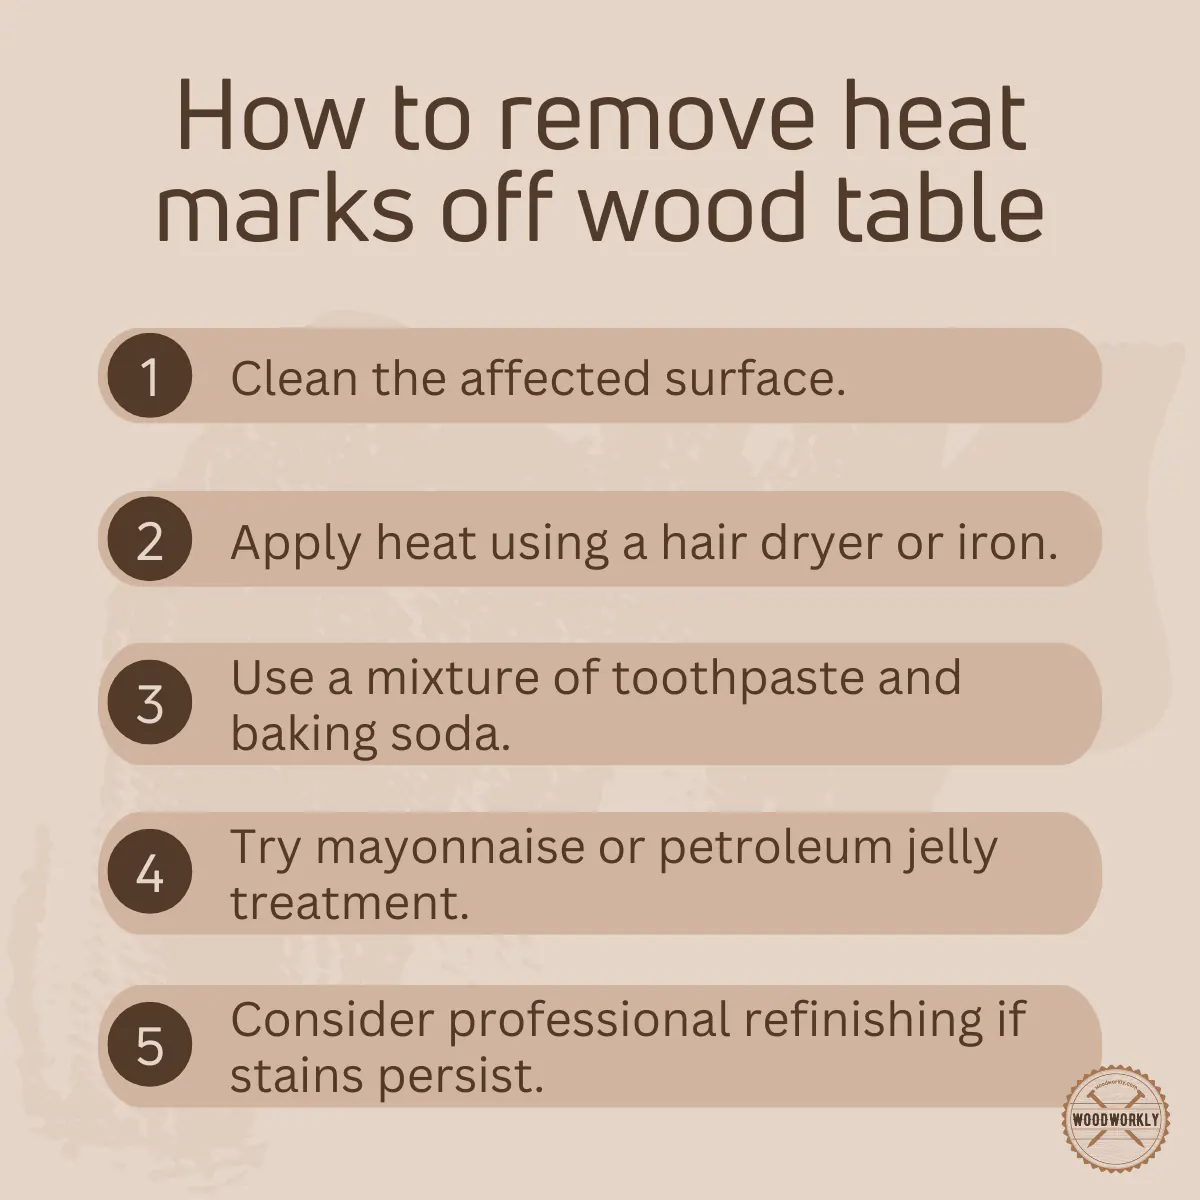 How to remove heat marks off wood table